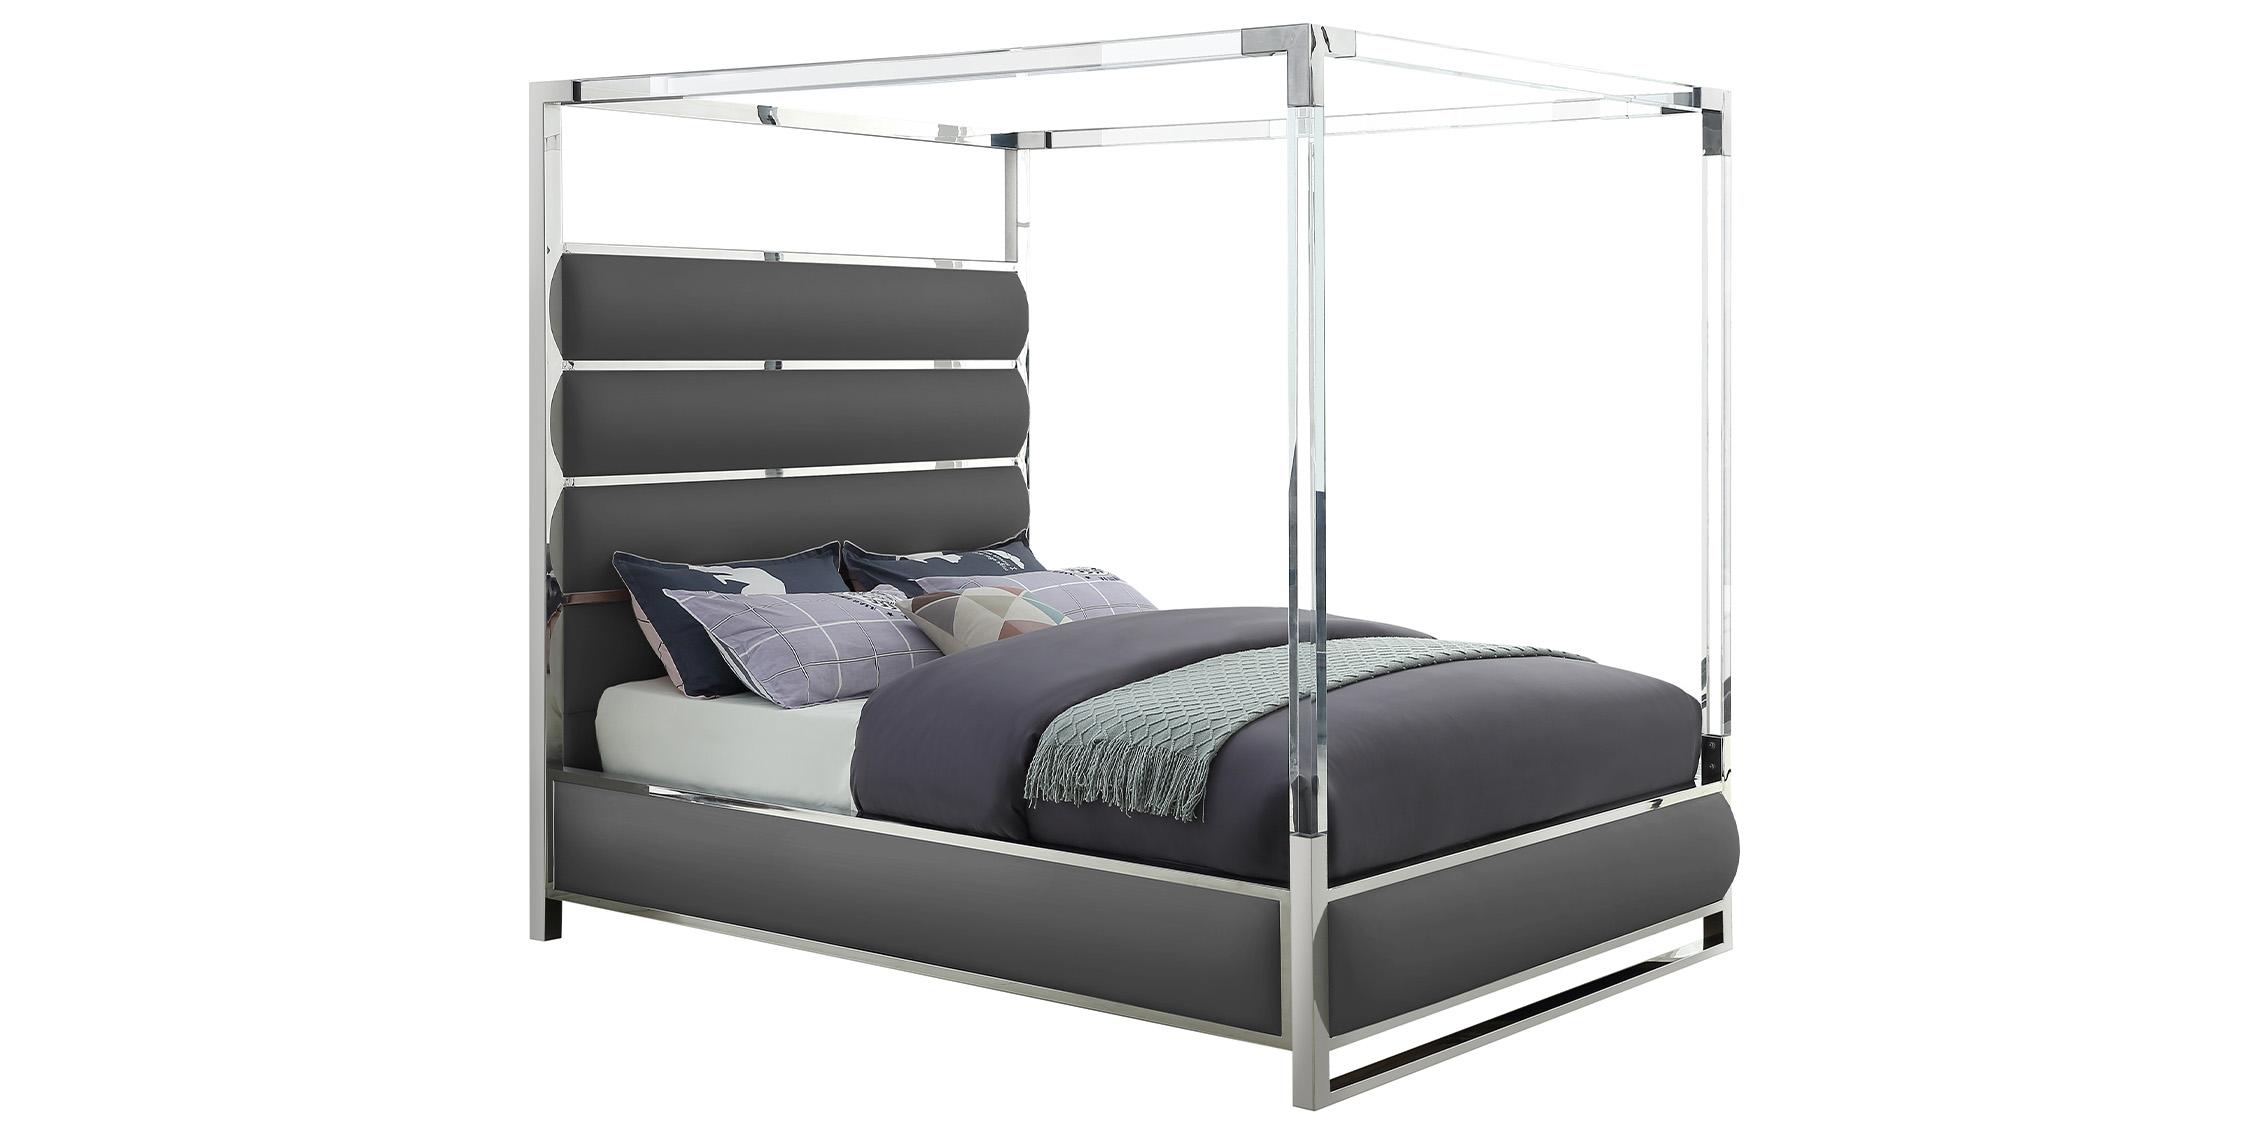 

    
Glam Grey Faux Leather & Chrome Canopy Queen Bed ENCORE Meridian Modern
